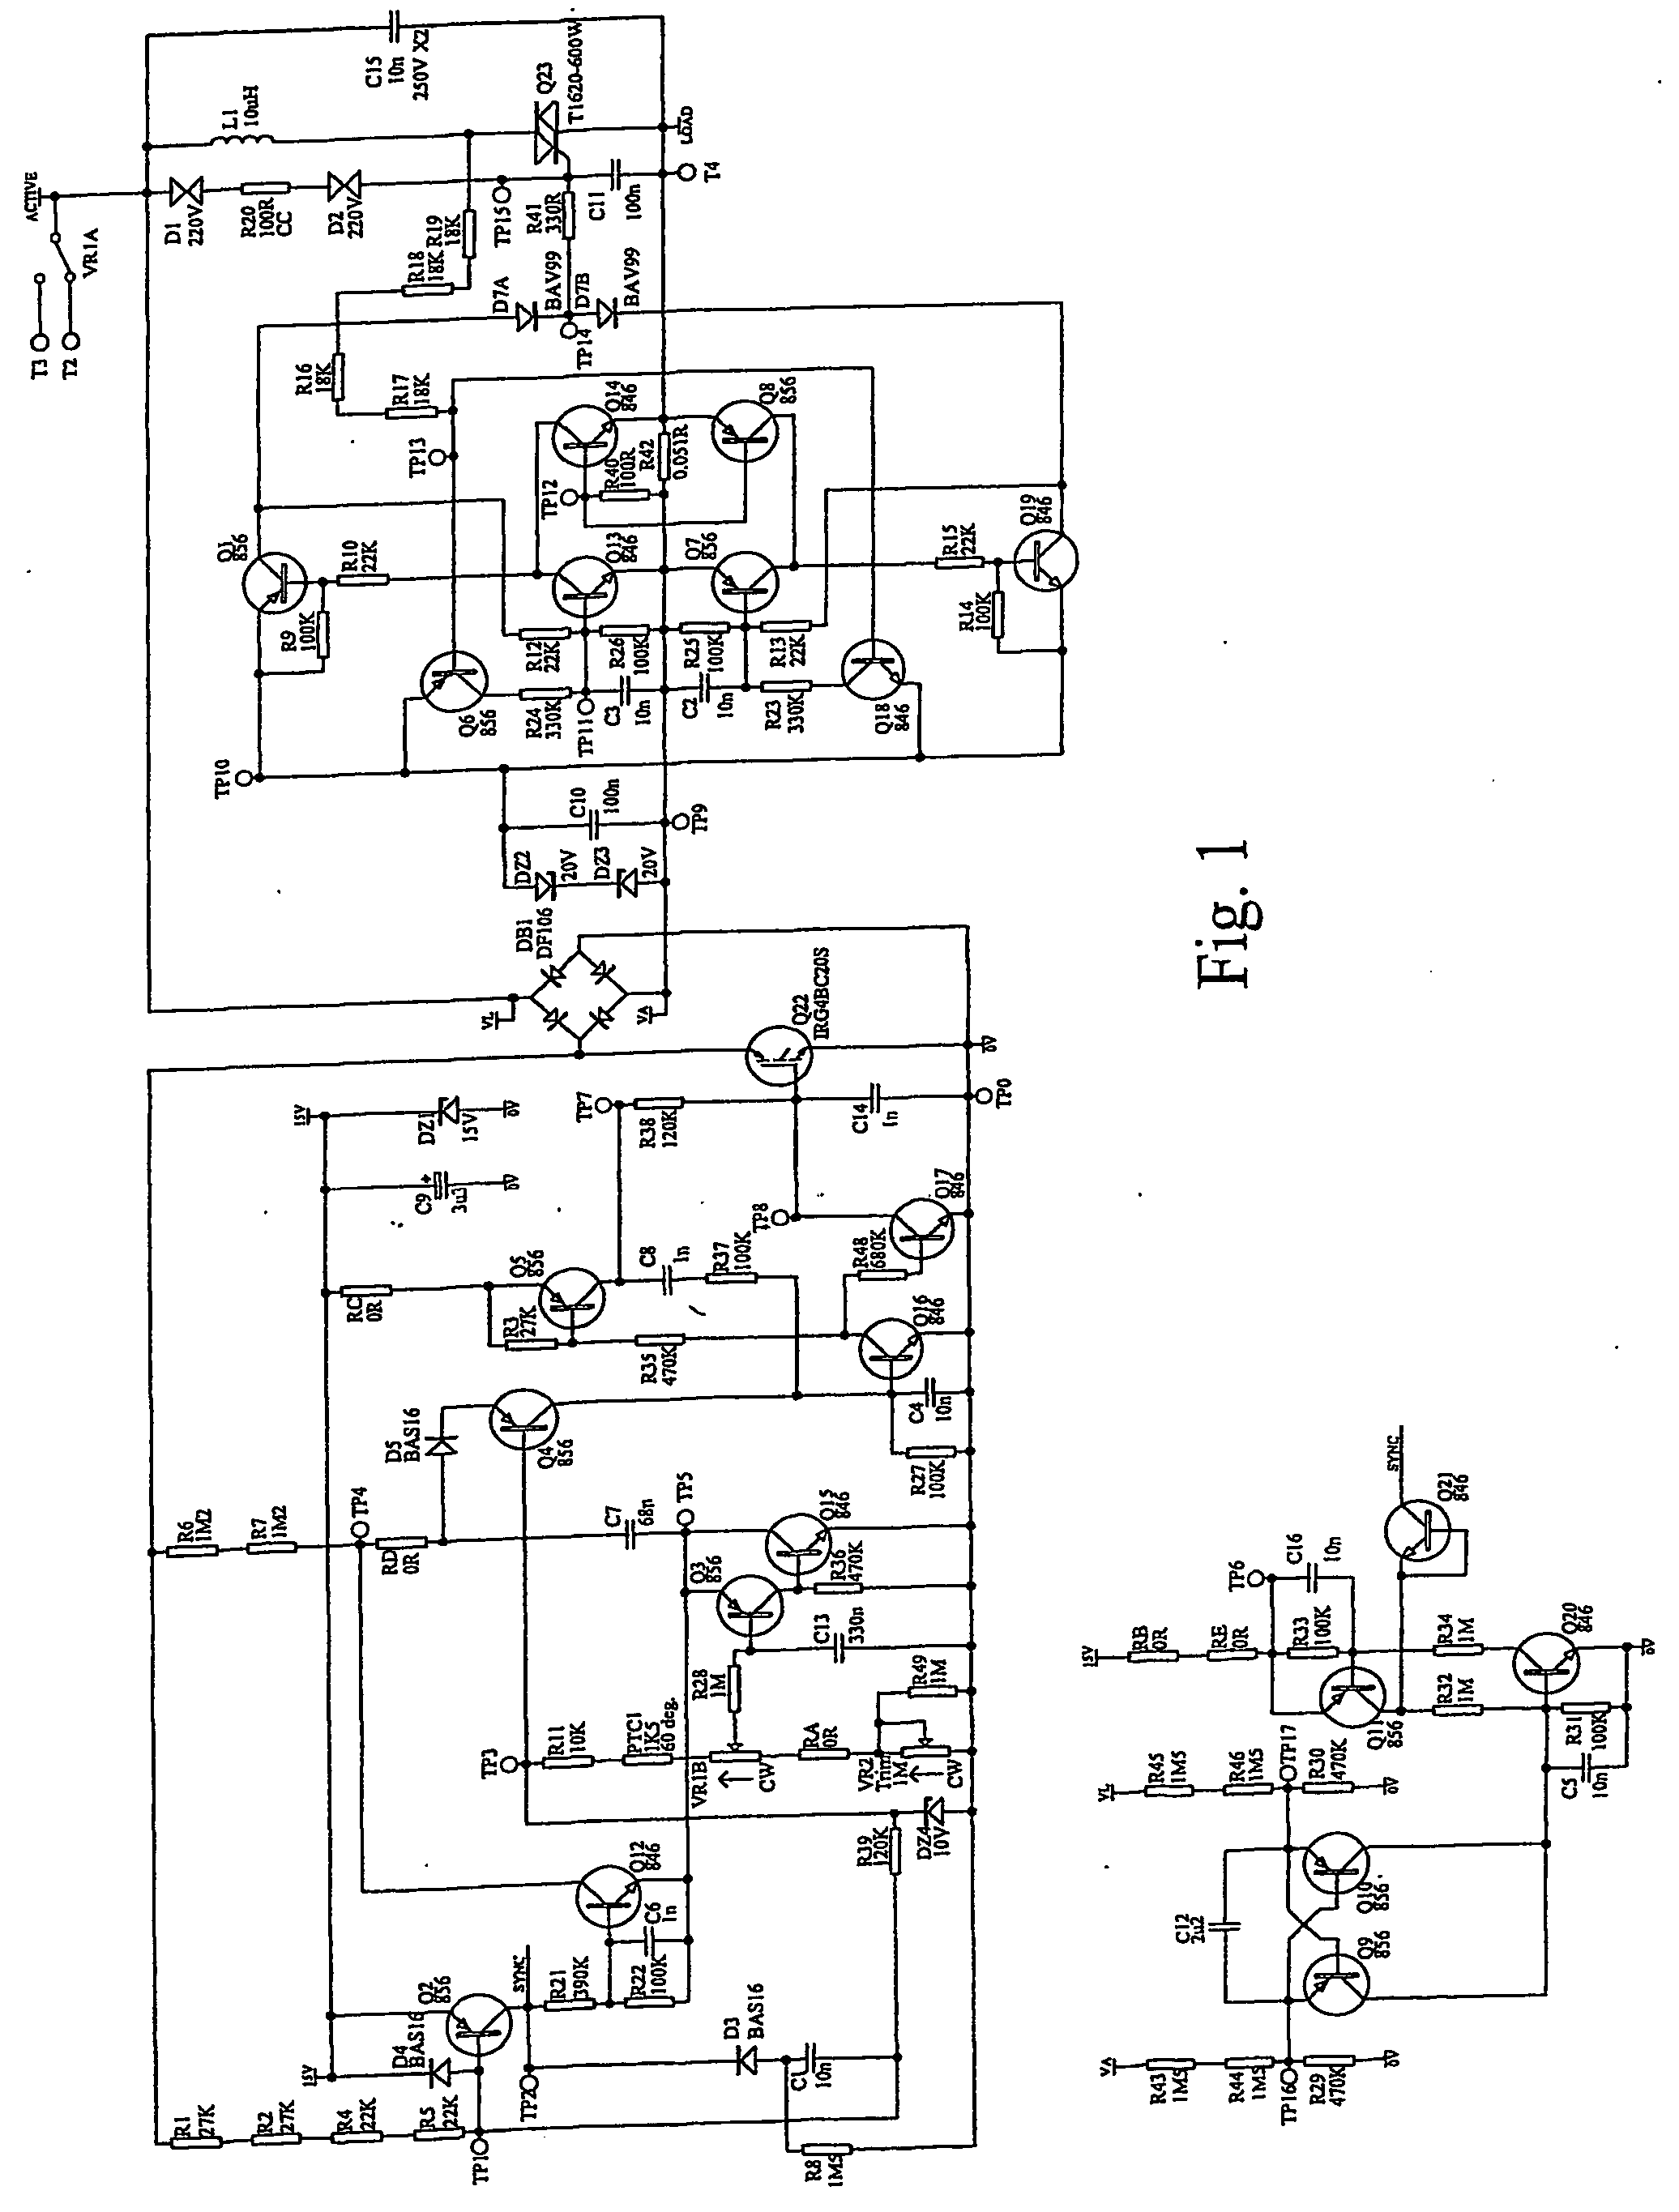 Dimmer circuit with improved inductive load imbalance protection